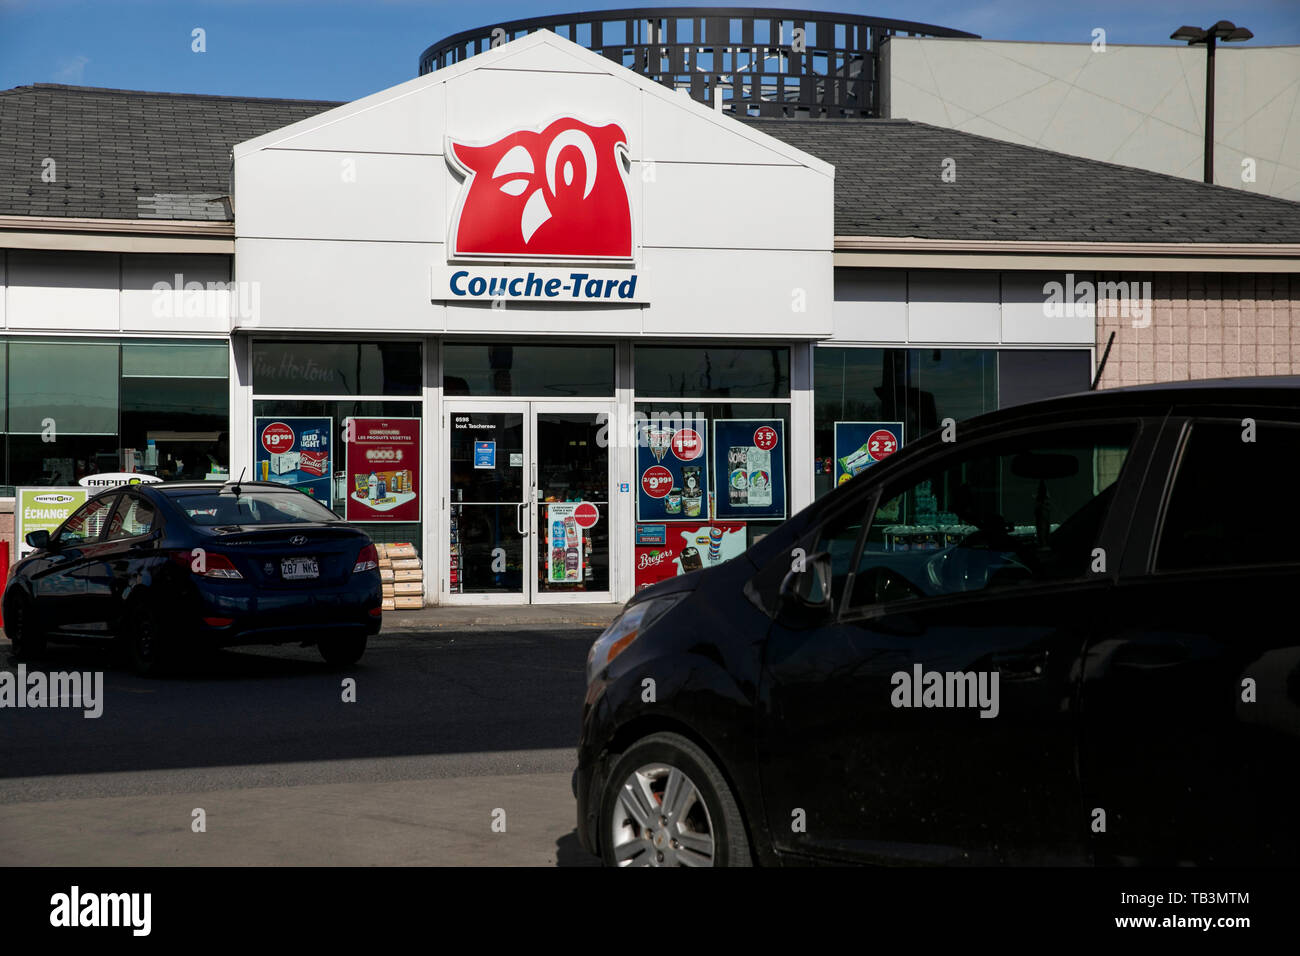 A logo sign outside of a Couche-Tard convenience store location in Brossard, Quebec, Canada, on April 23, 2019. Stock Photo